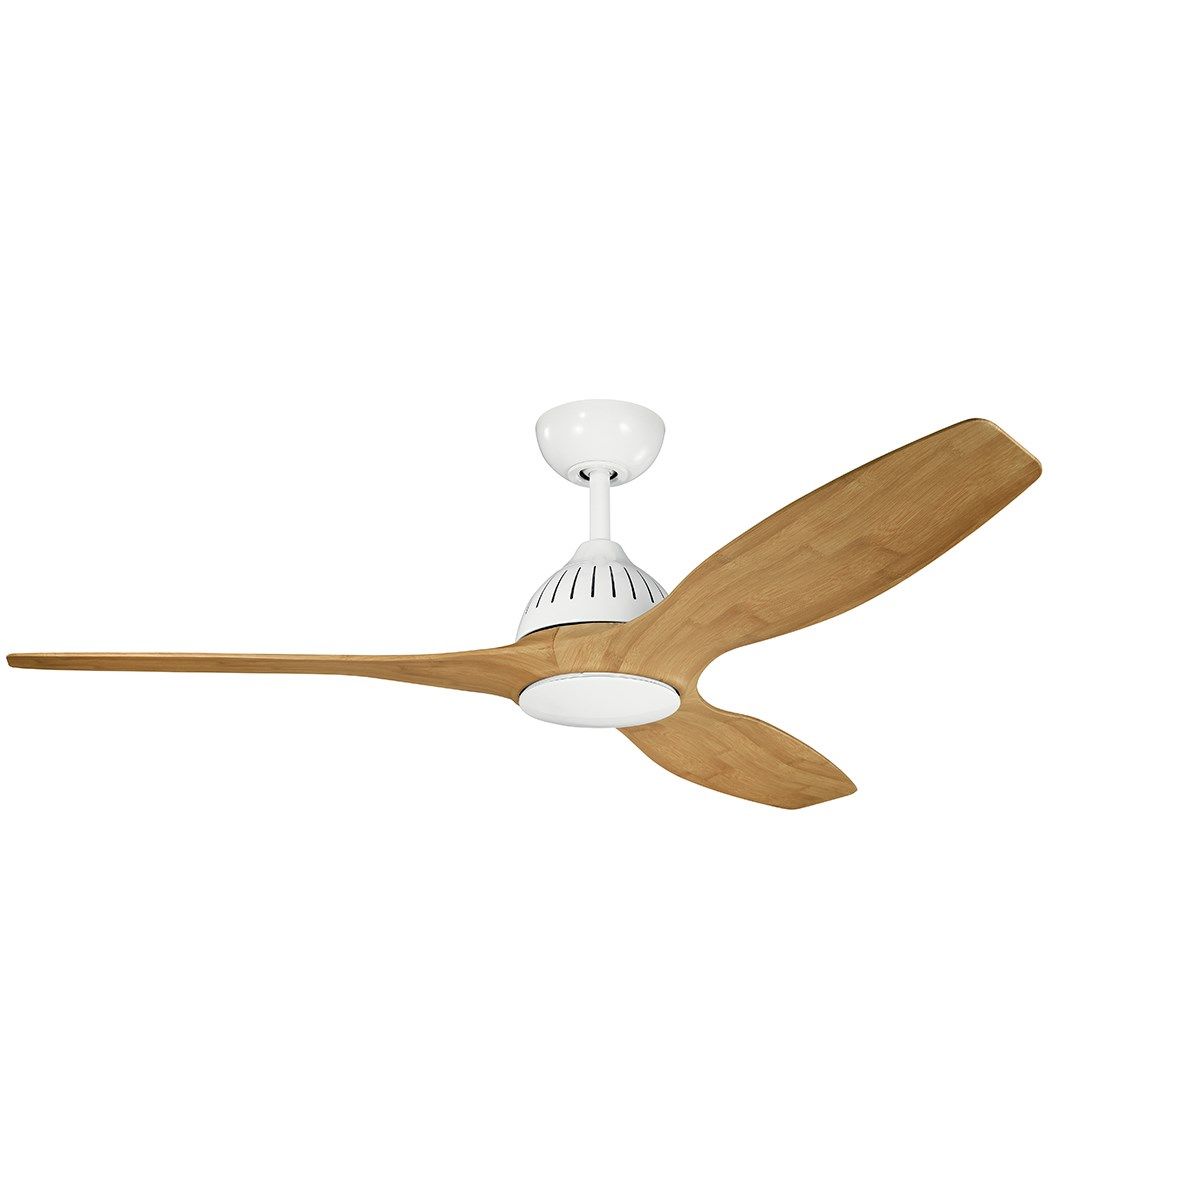 Jace 60 Inch Propeller Outdoor Ceiling Fan With Light And Wall Control